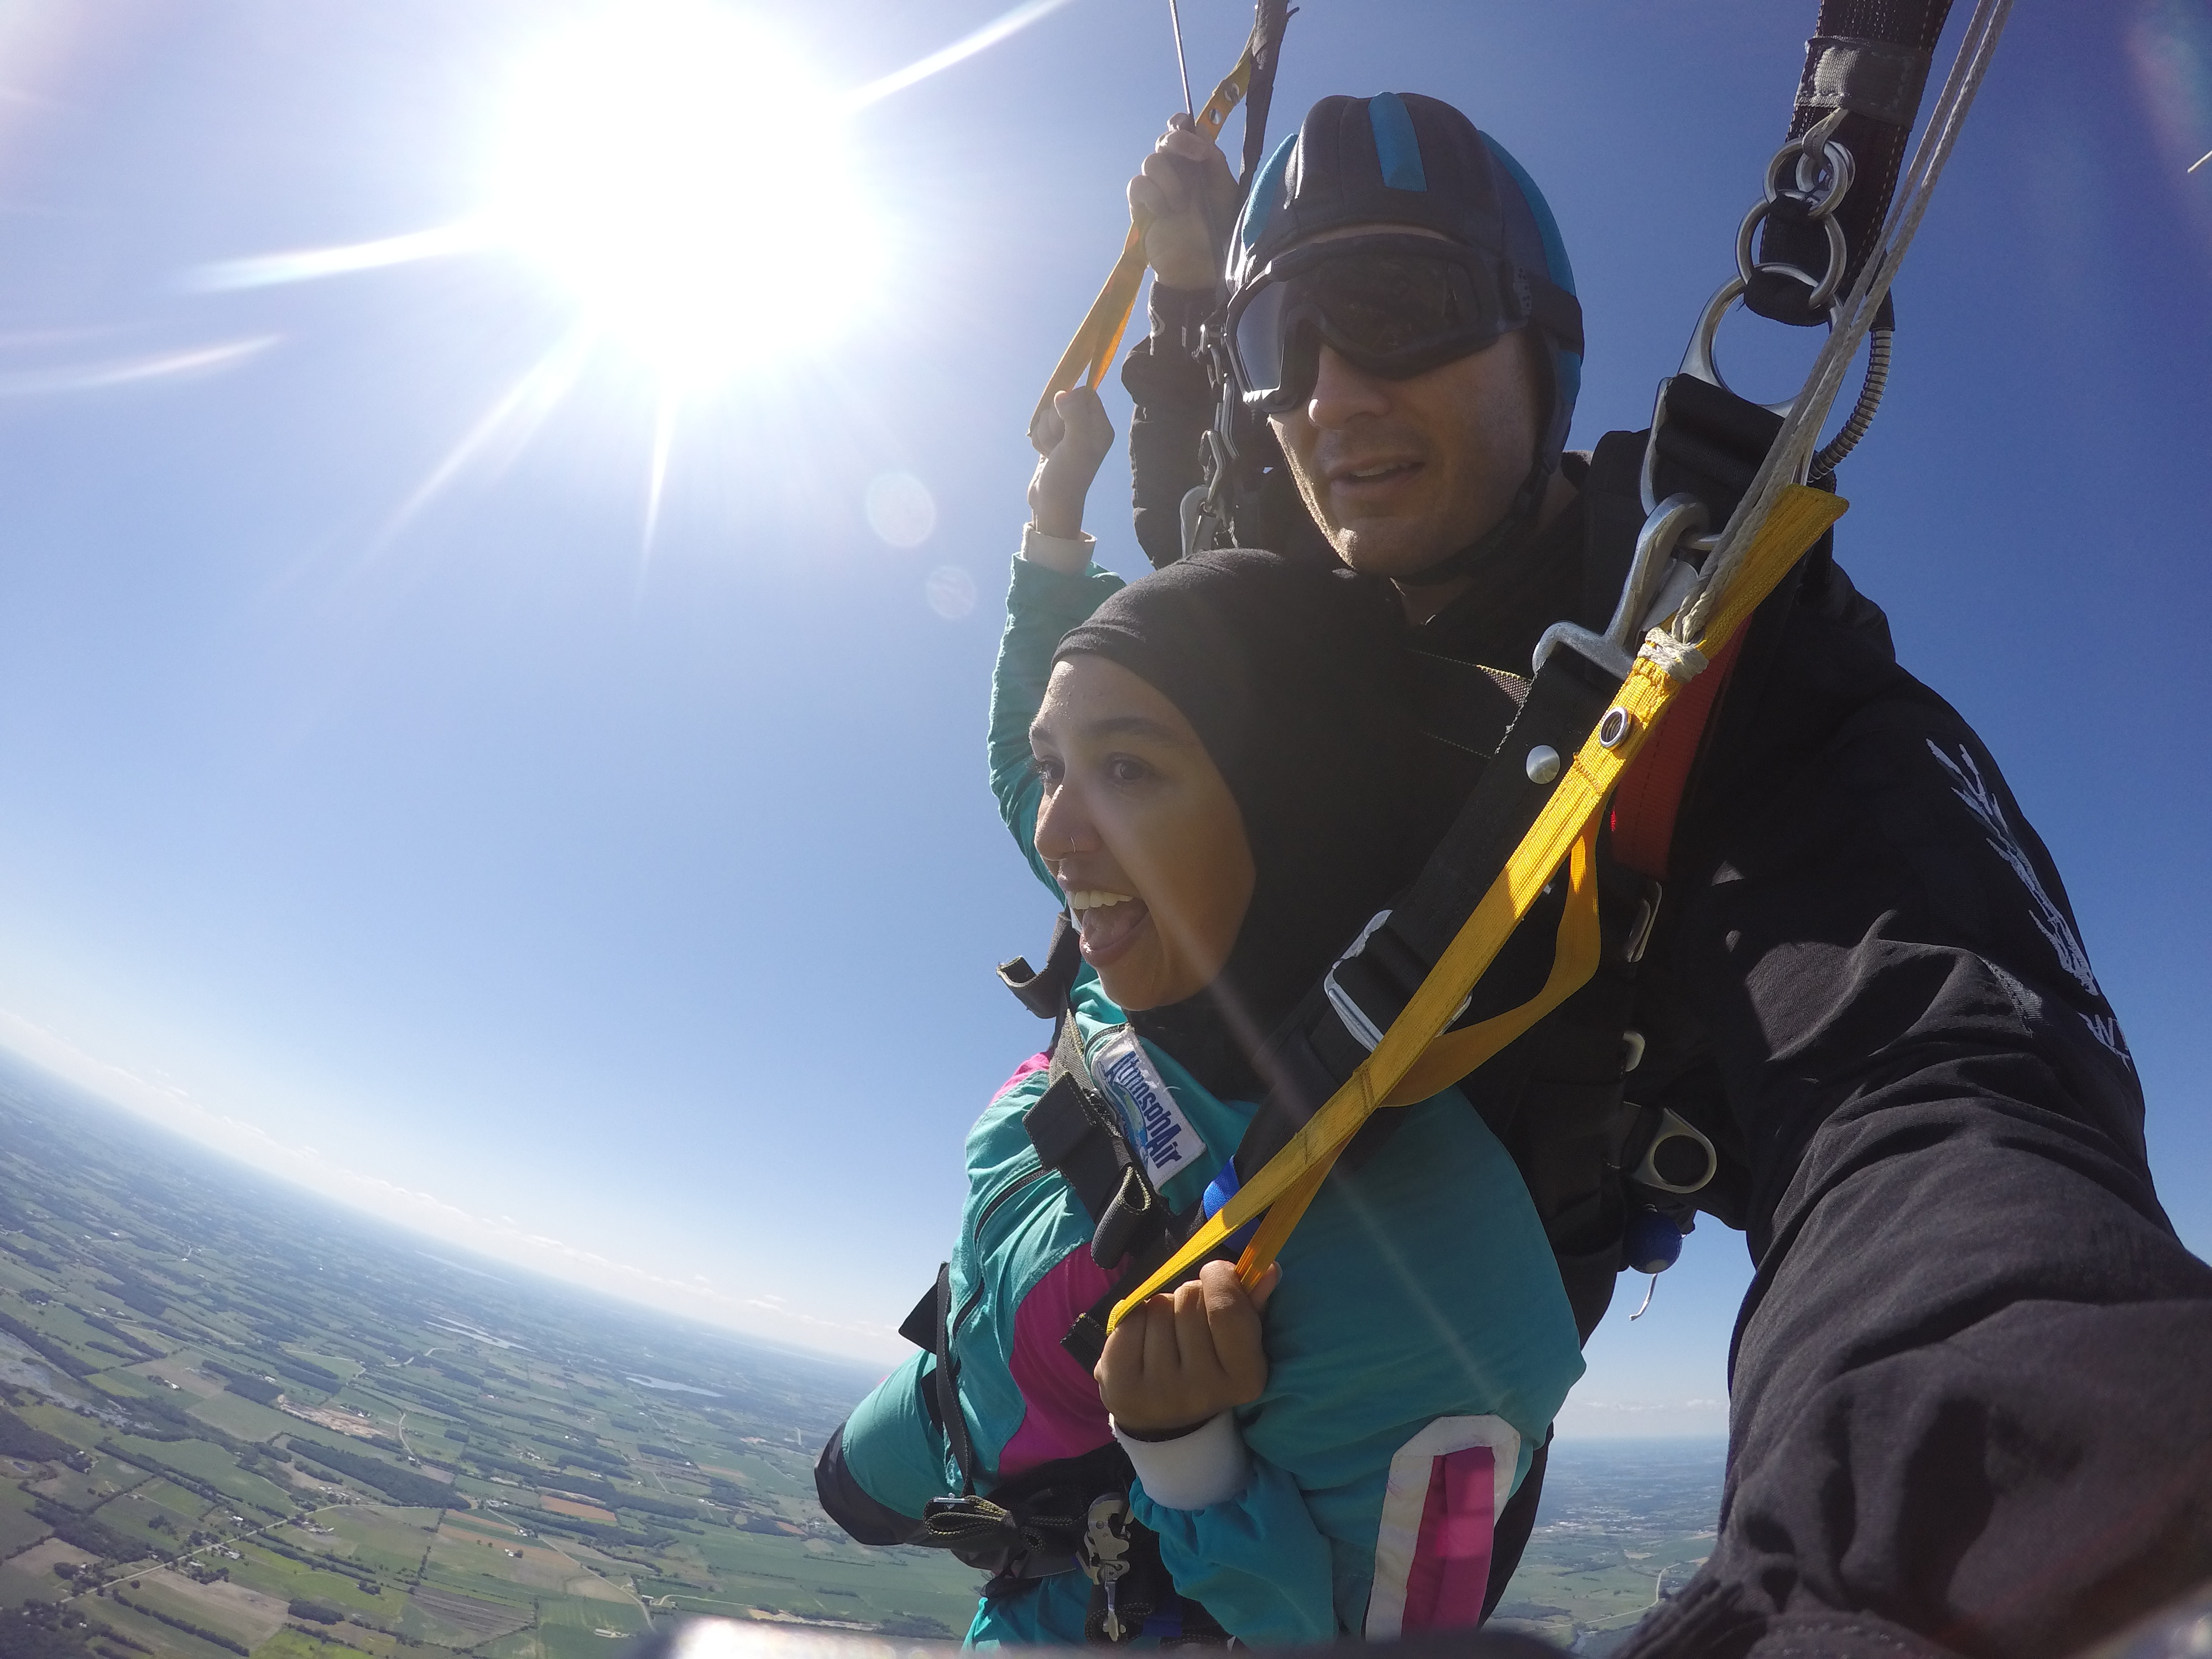 Skydiving in late fall near Milwaukee, Wisconsin is cold - when does skydiving season end?